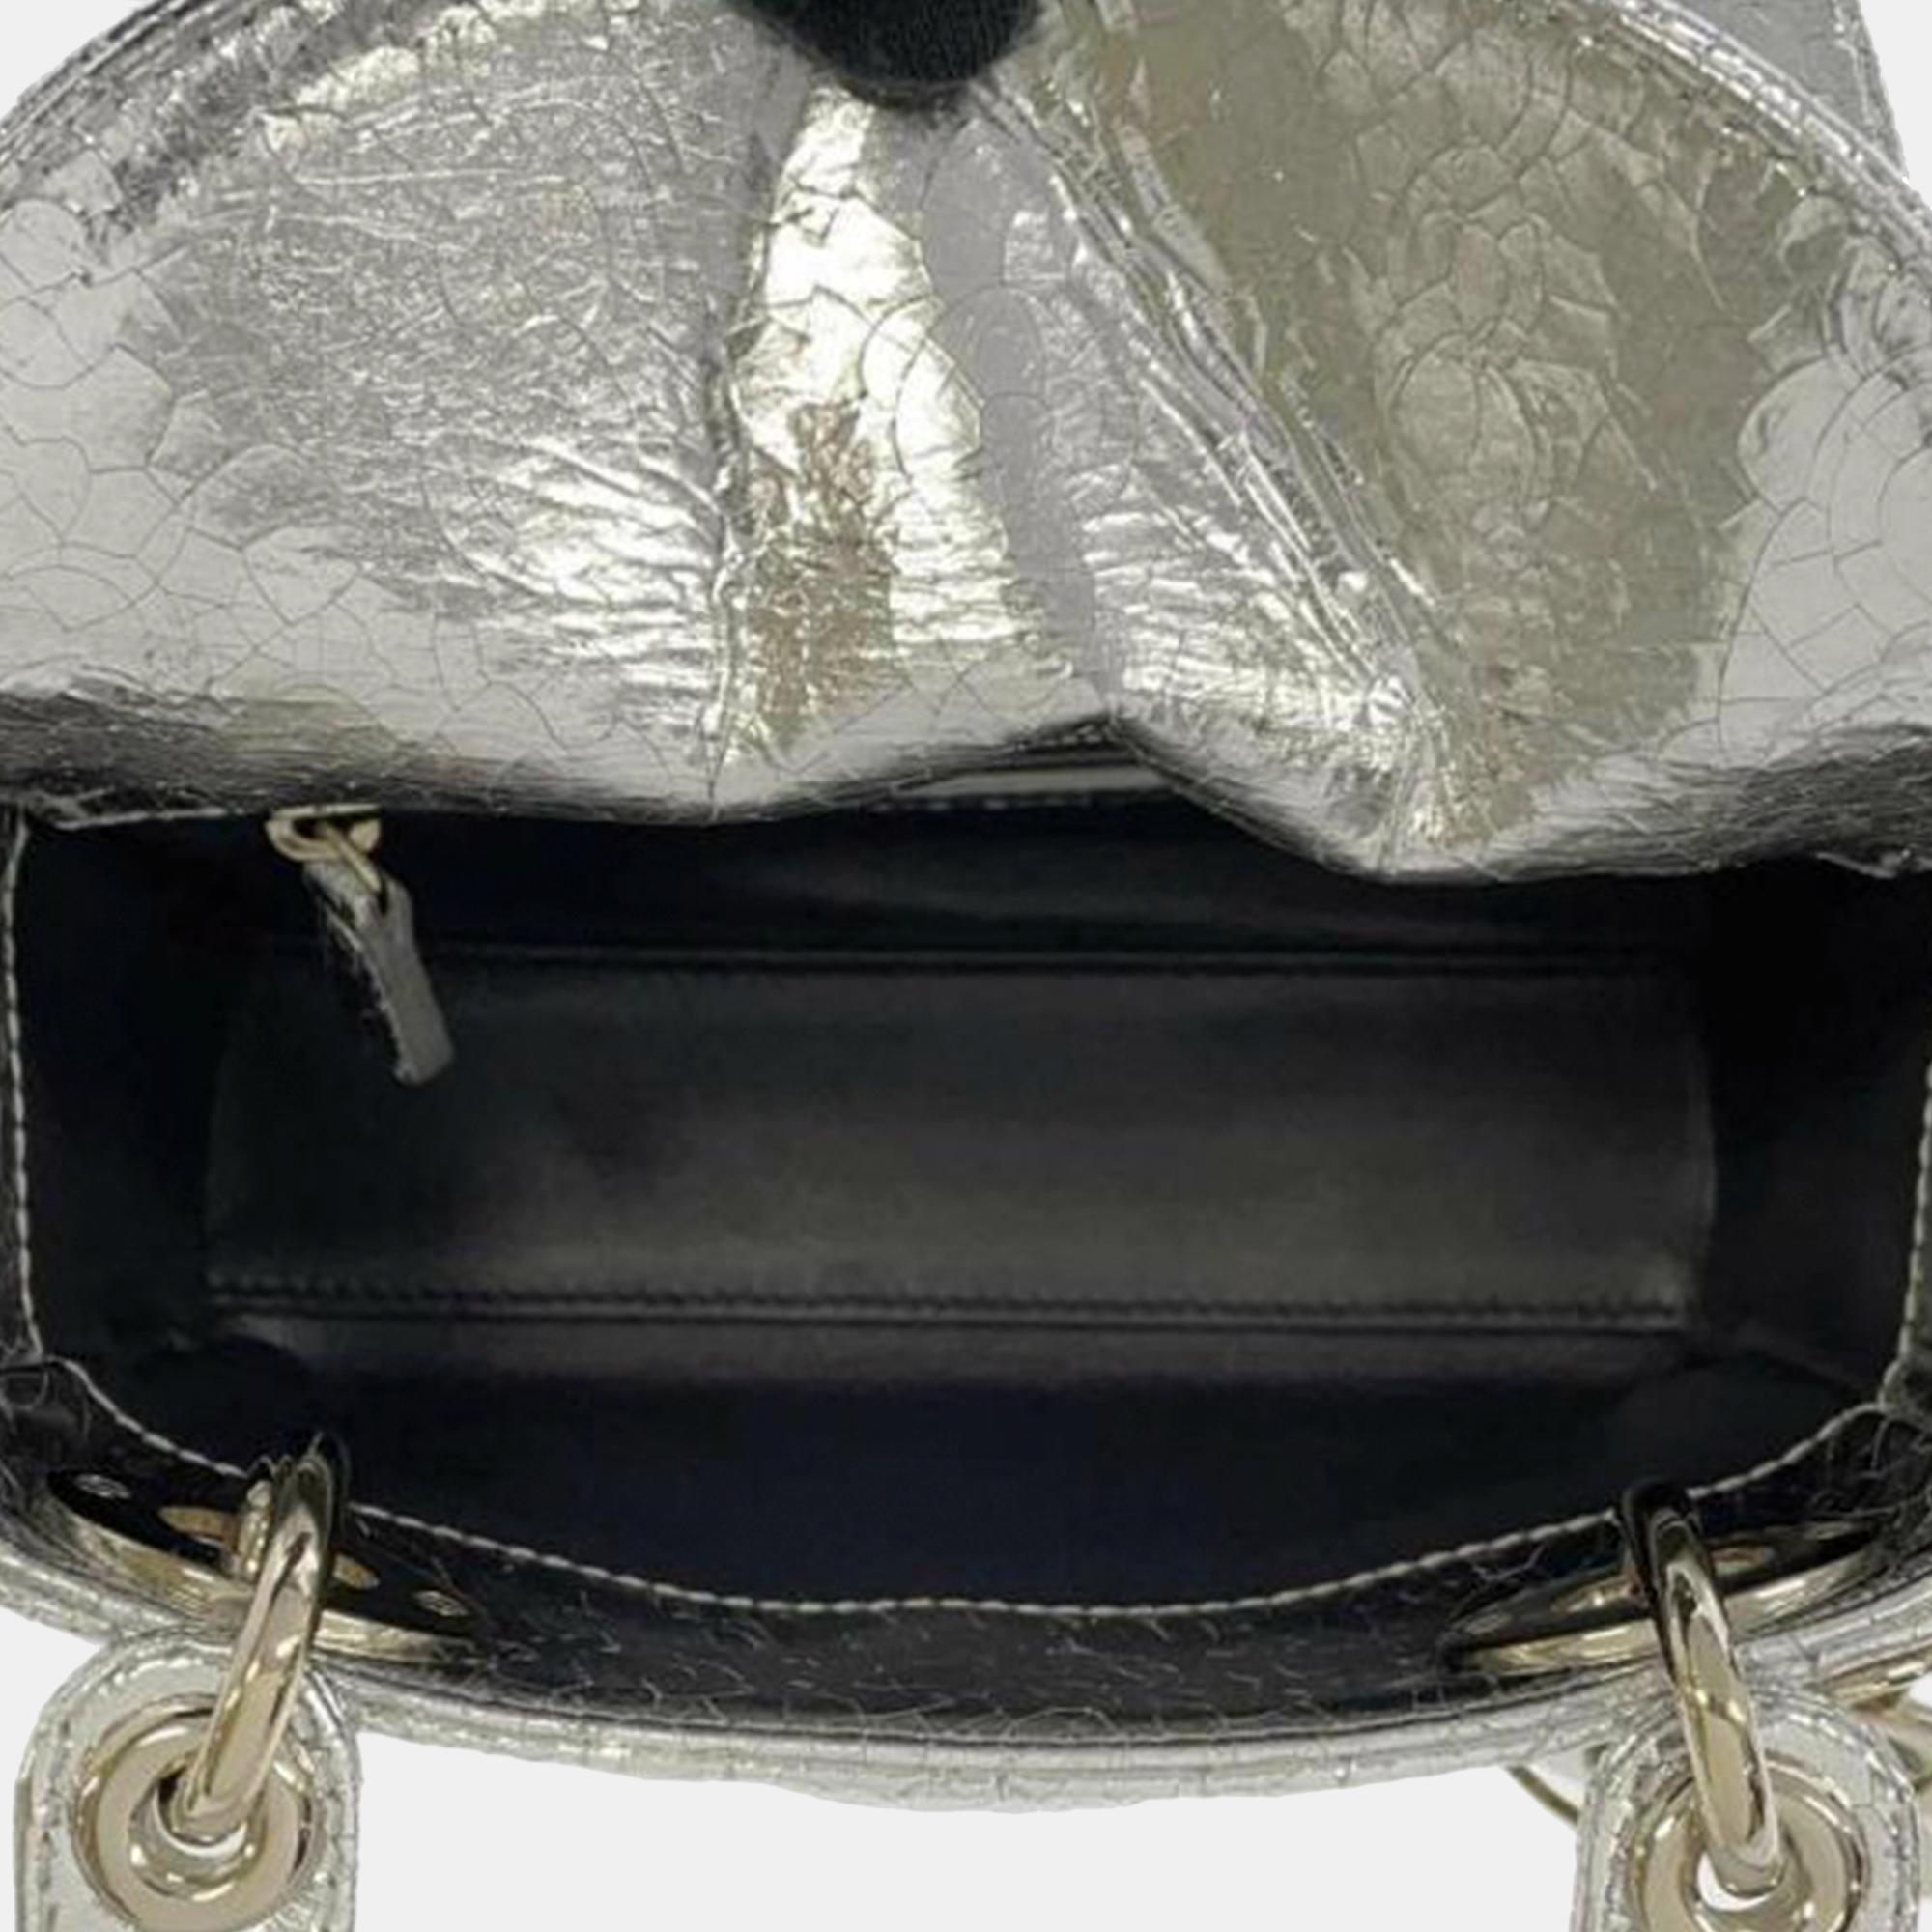 Dior Silver Mini Crackled Patent Deerskin Cannage Lady Dior